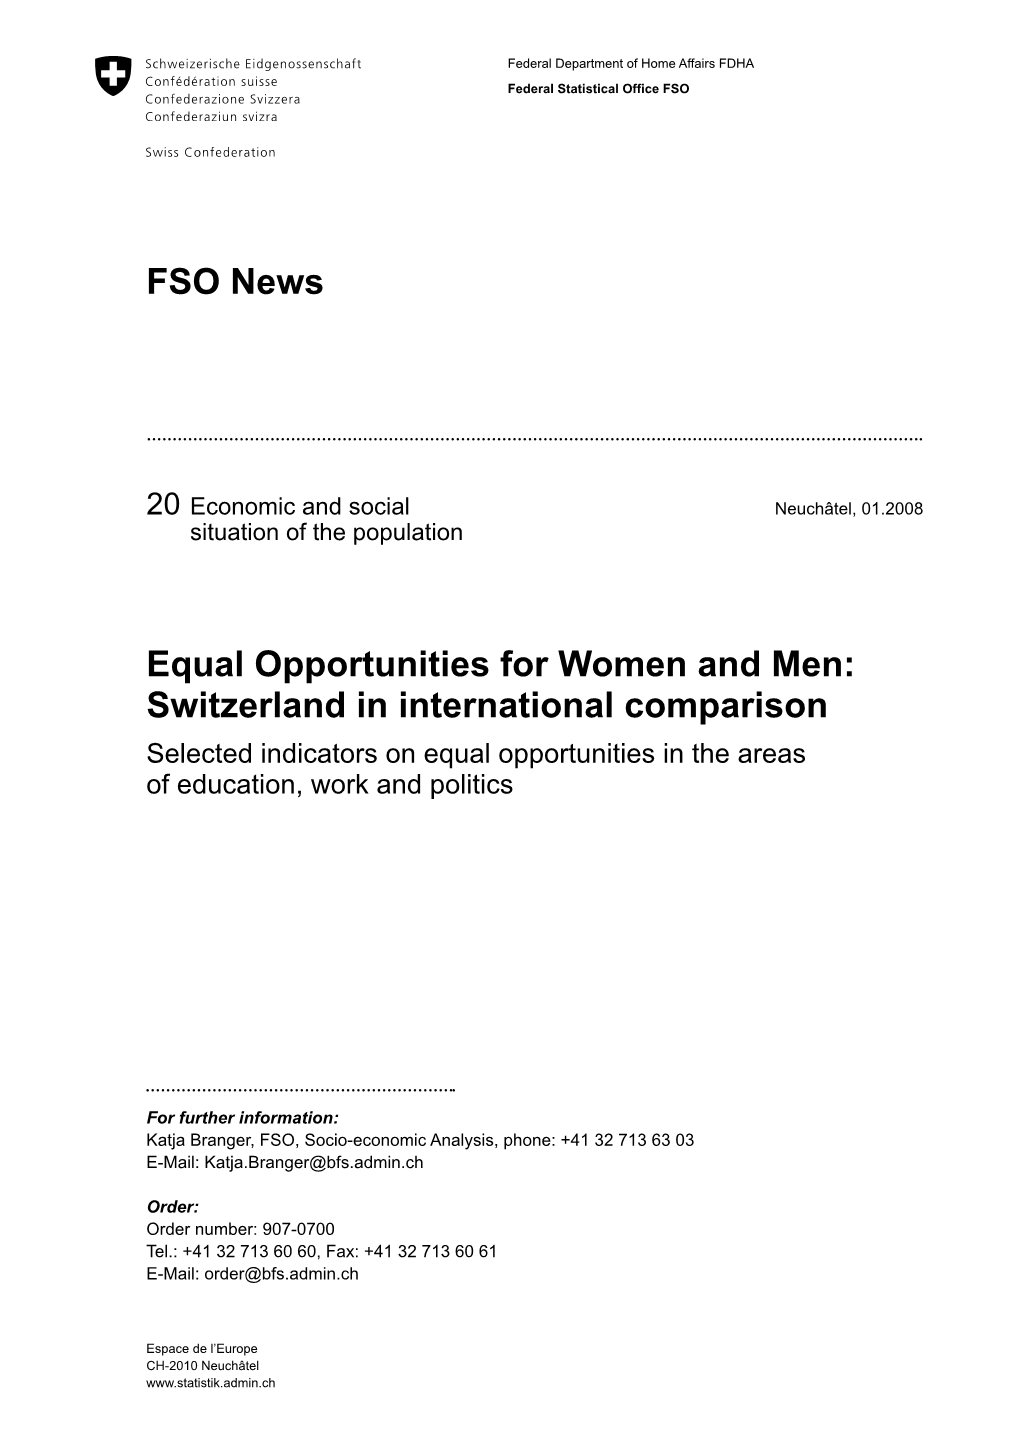 FSO News Equal Opportunities for Women and Men: Switzerland In